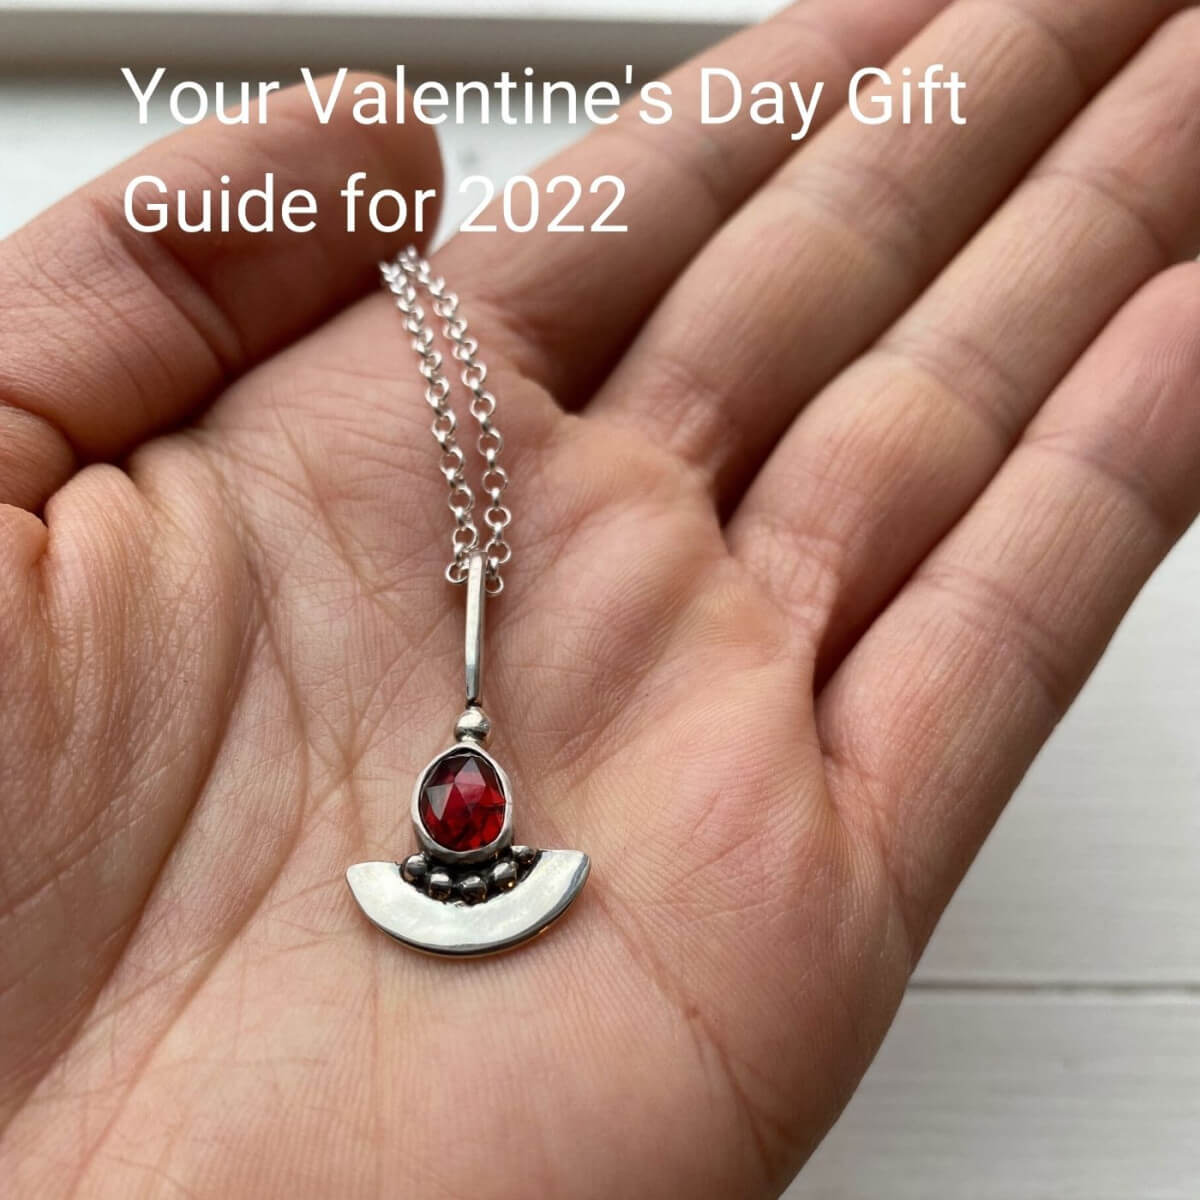 Your Valentine's Day Gift Guide for 2022